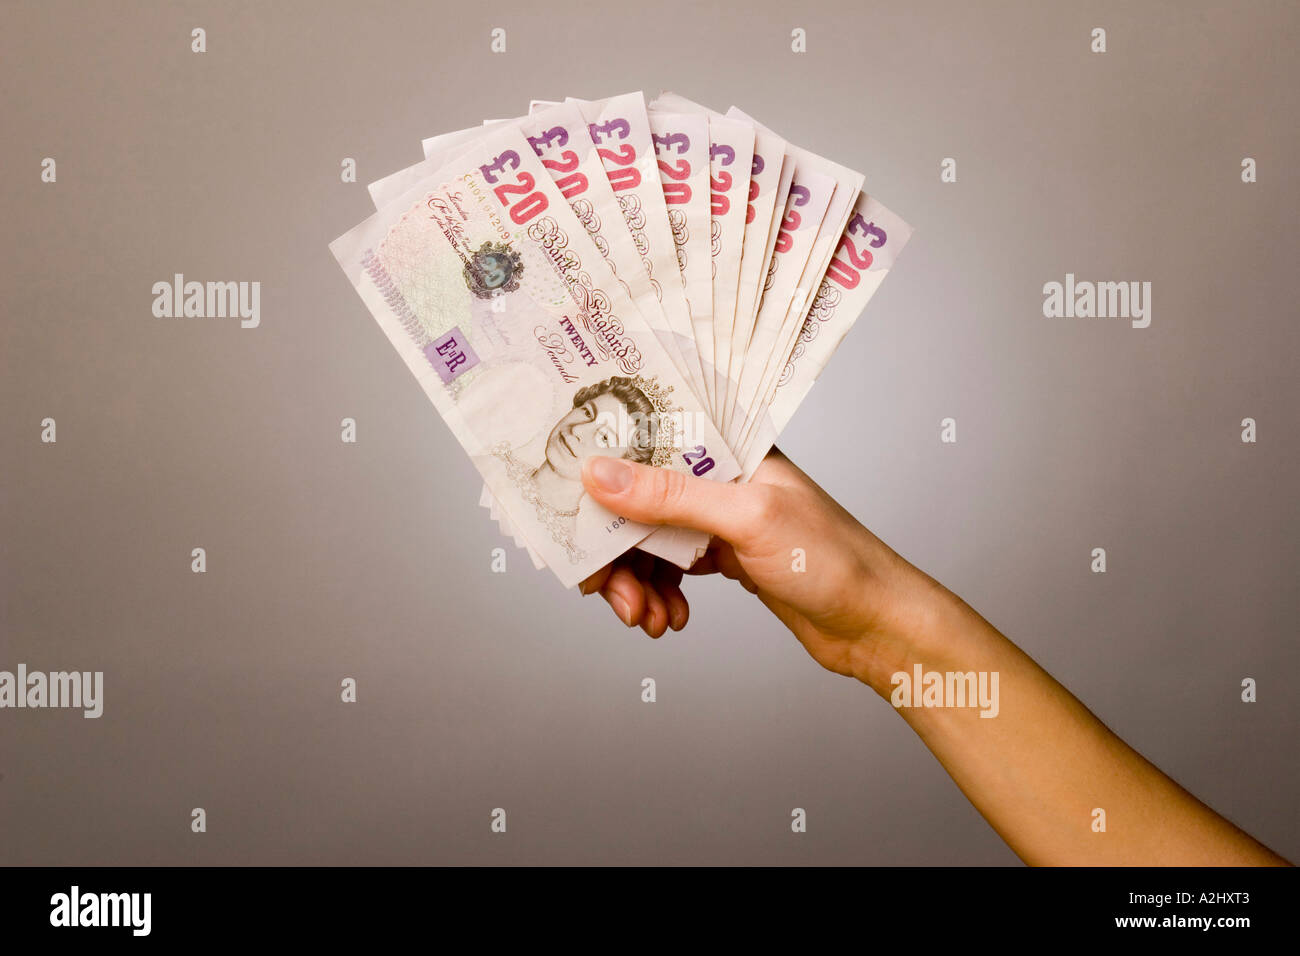 Hand holding/displaying a  fan of £20.00 notes Stock Photo